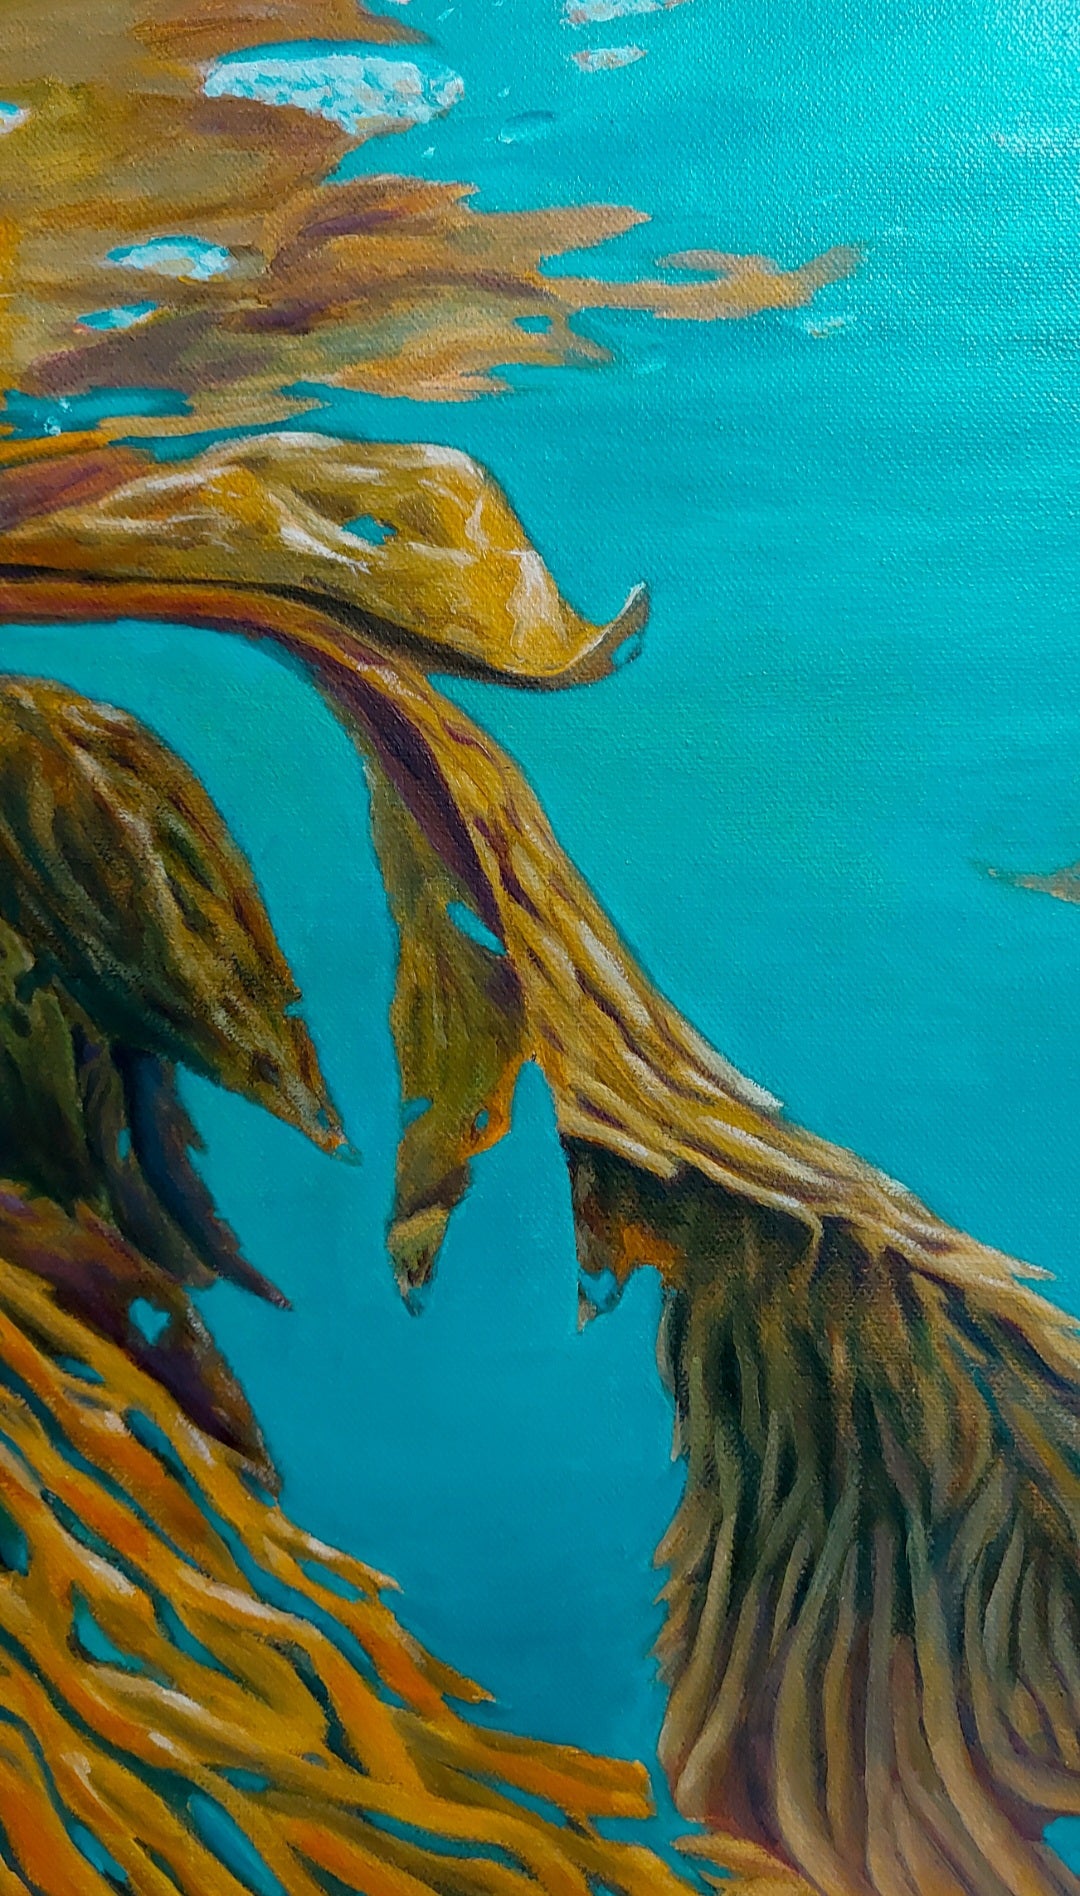 Recover is an oil painting on canvas by Katherine Polack of a mustard coloured sea kelp in a brightly coloured turquoise emerald water. It's reflection can be seen on the surface on the top 1/3 of the painting. Recover symbolizes the resilience and strength that we all have within us and was inspired by the documentary My Octopus Teacher. Find the many hidden hearts in the painting. 18 x 24" oil on canvas